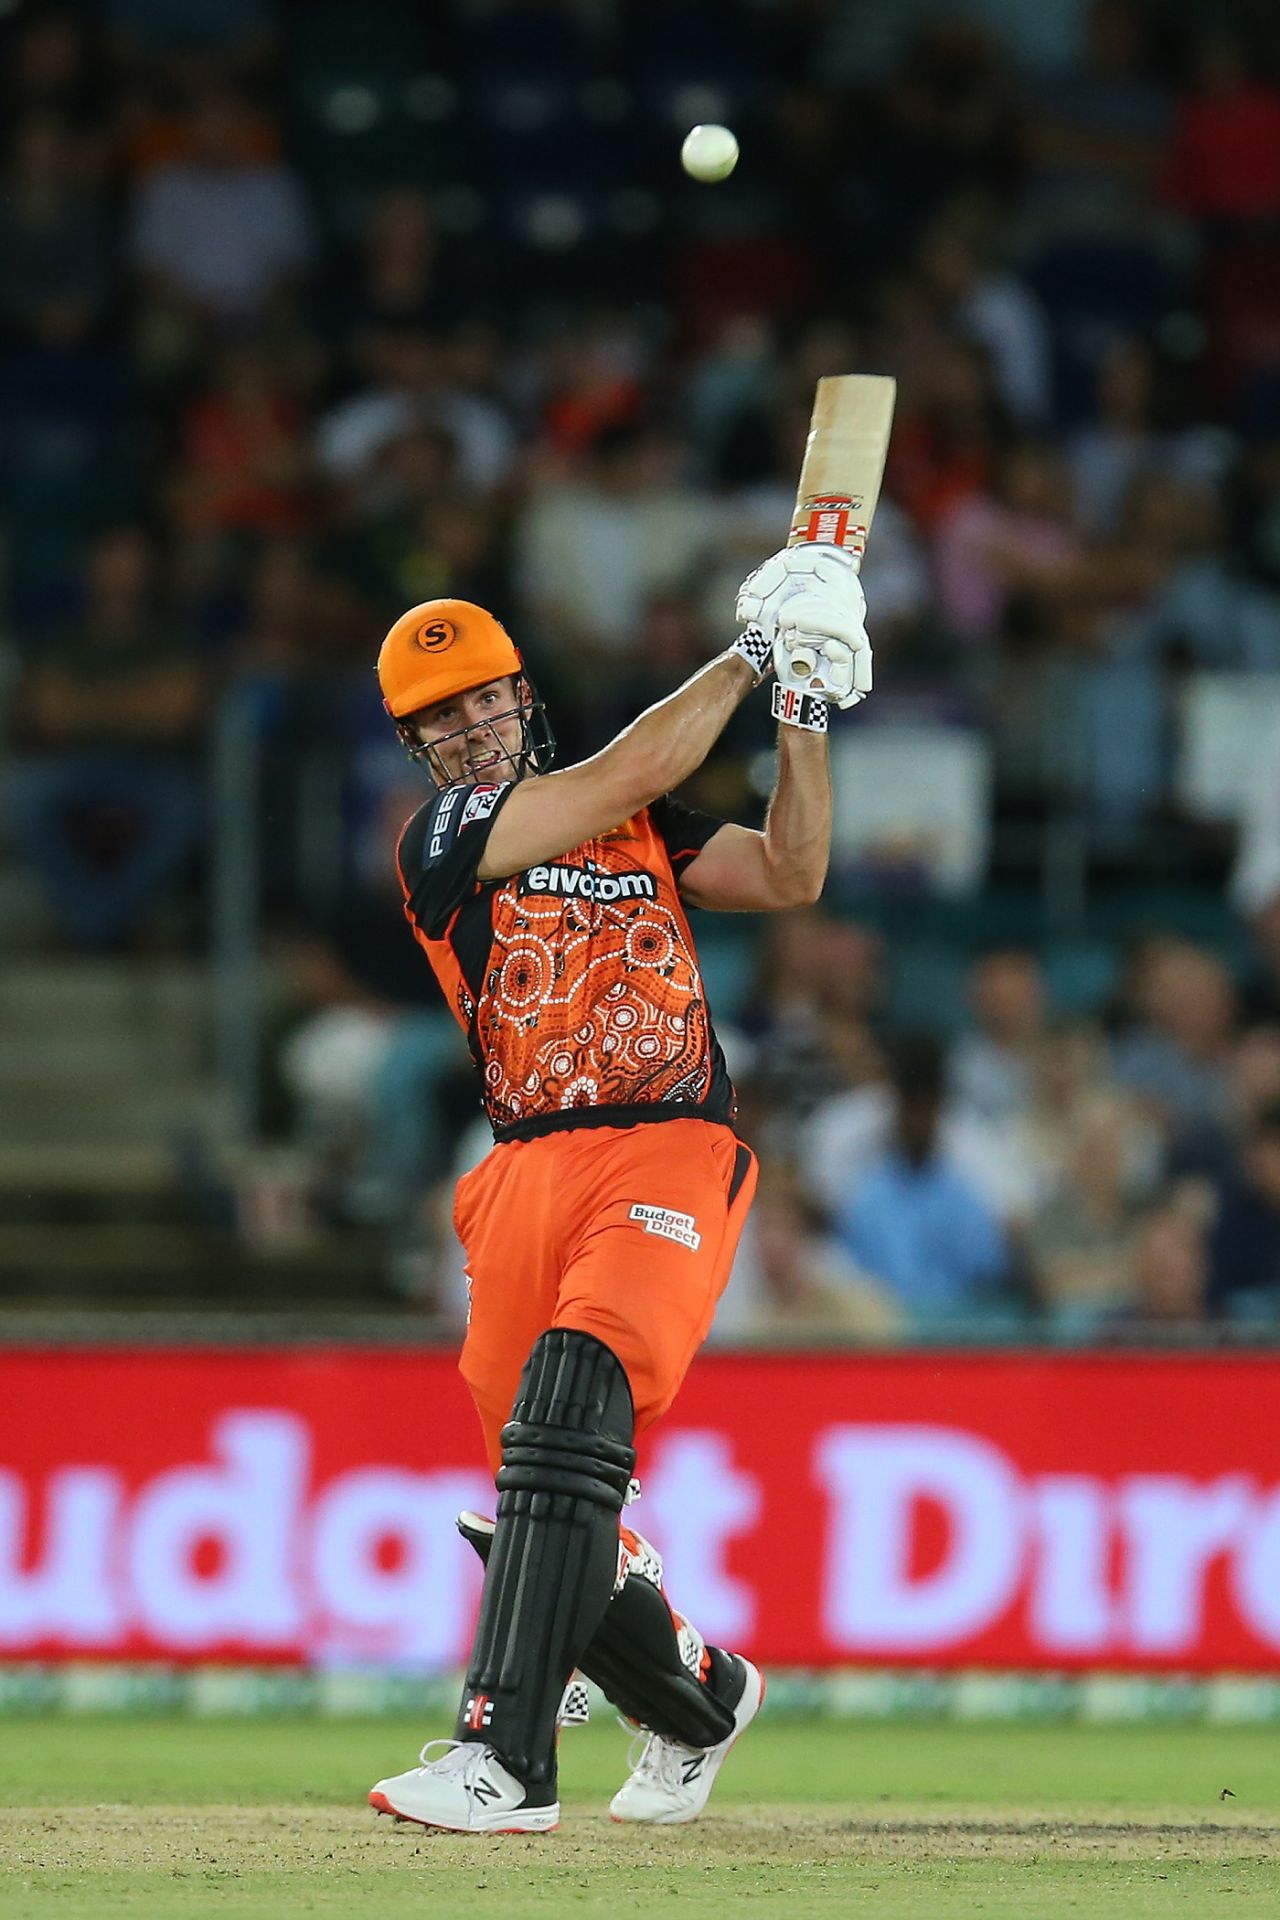 Mitchell Marsh powers the ball down the ground, Brisbane Heat vs Perth Scorchers, BBL 2020-21, Challenger, Canberra, February 4, 2021